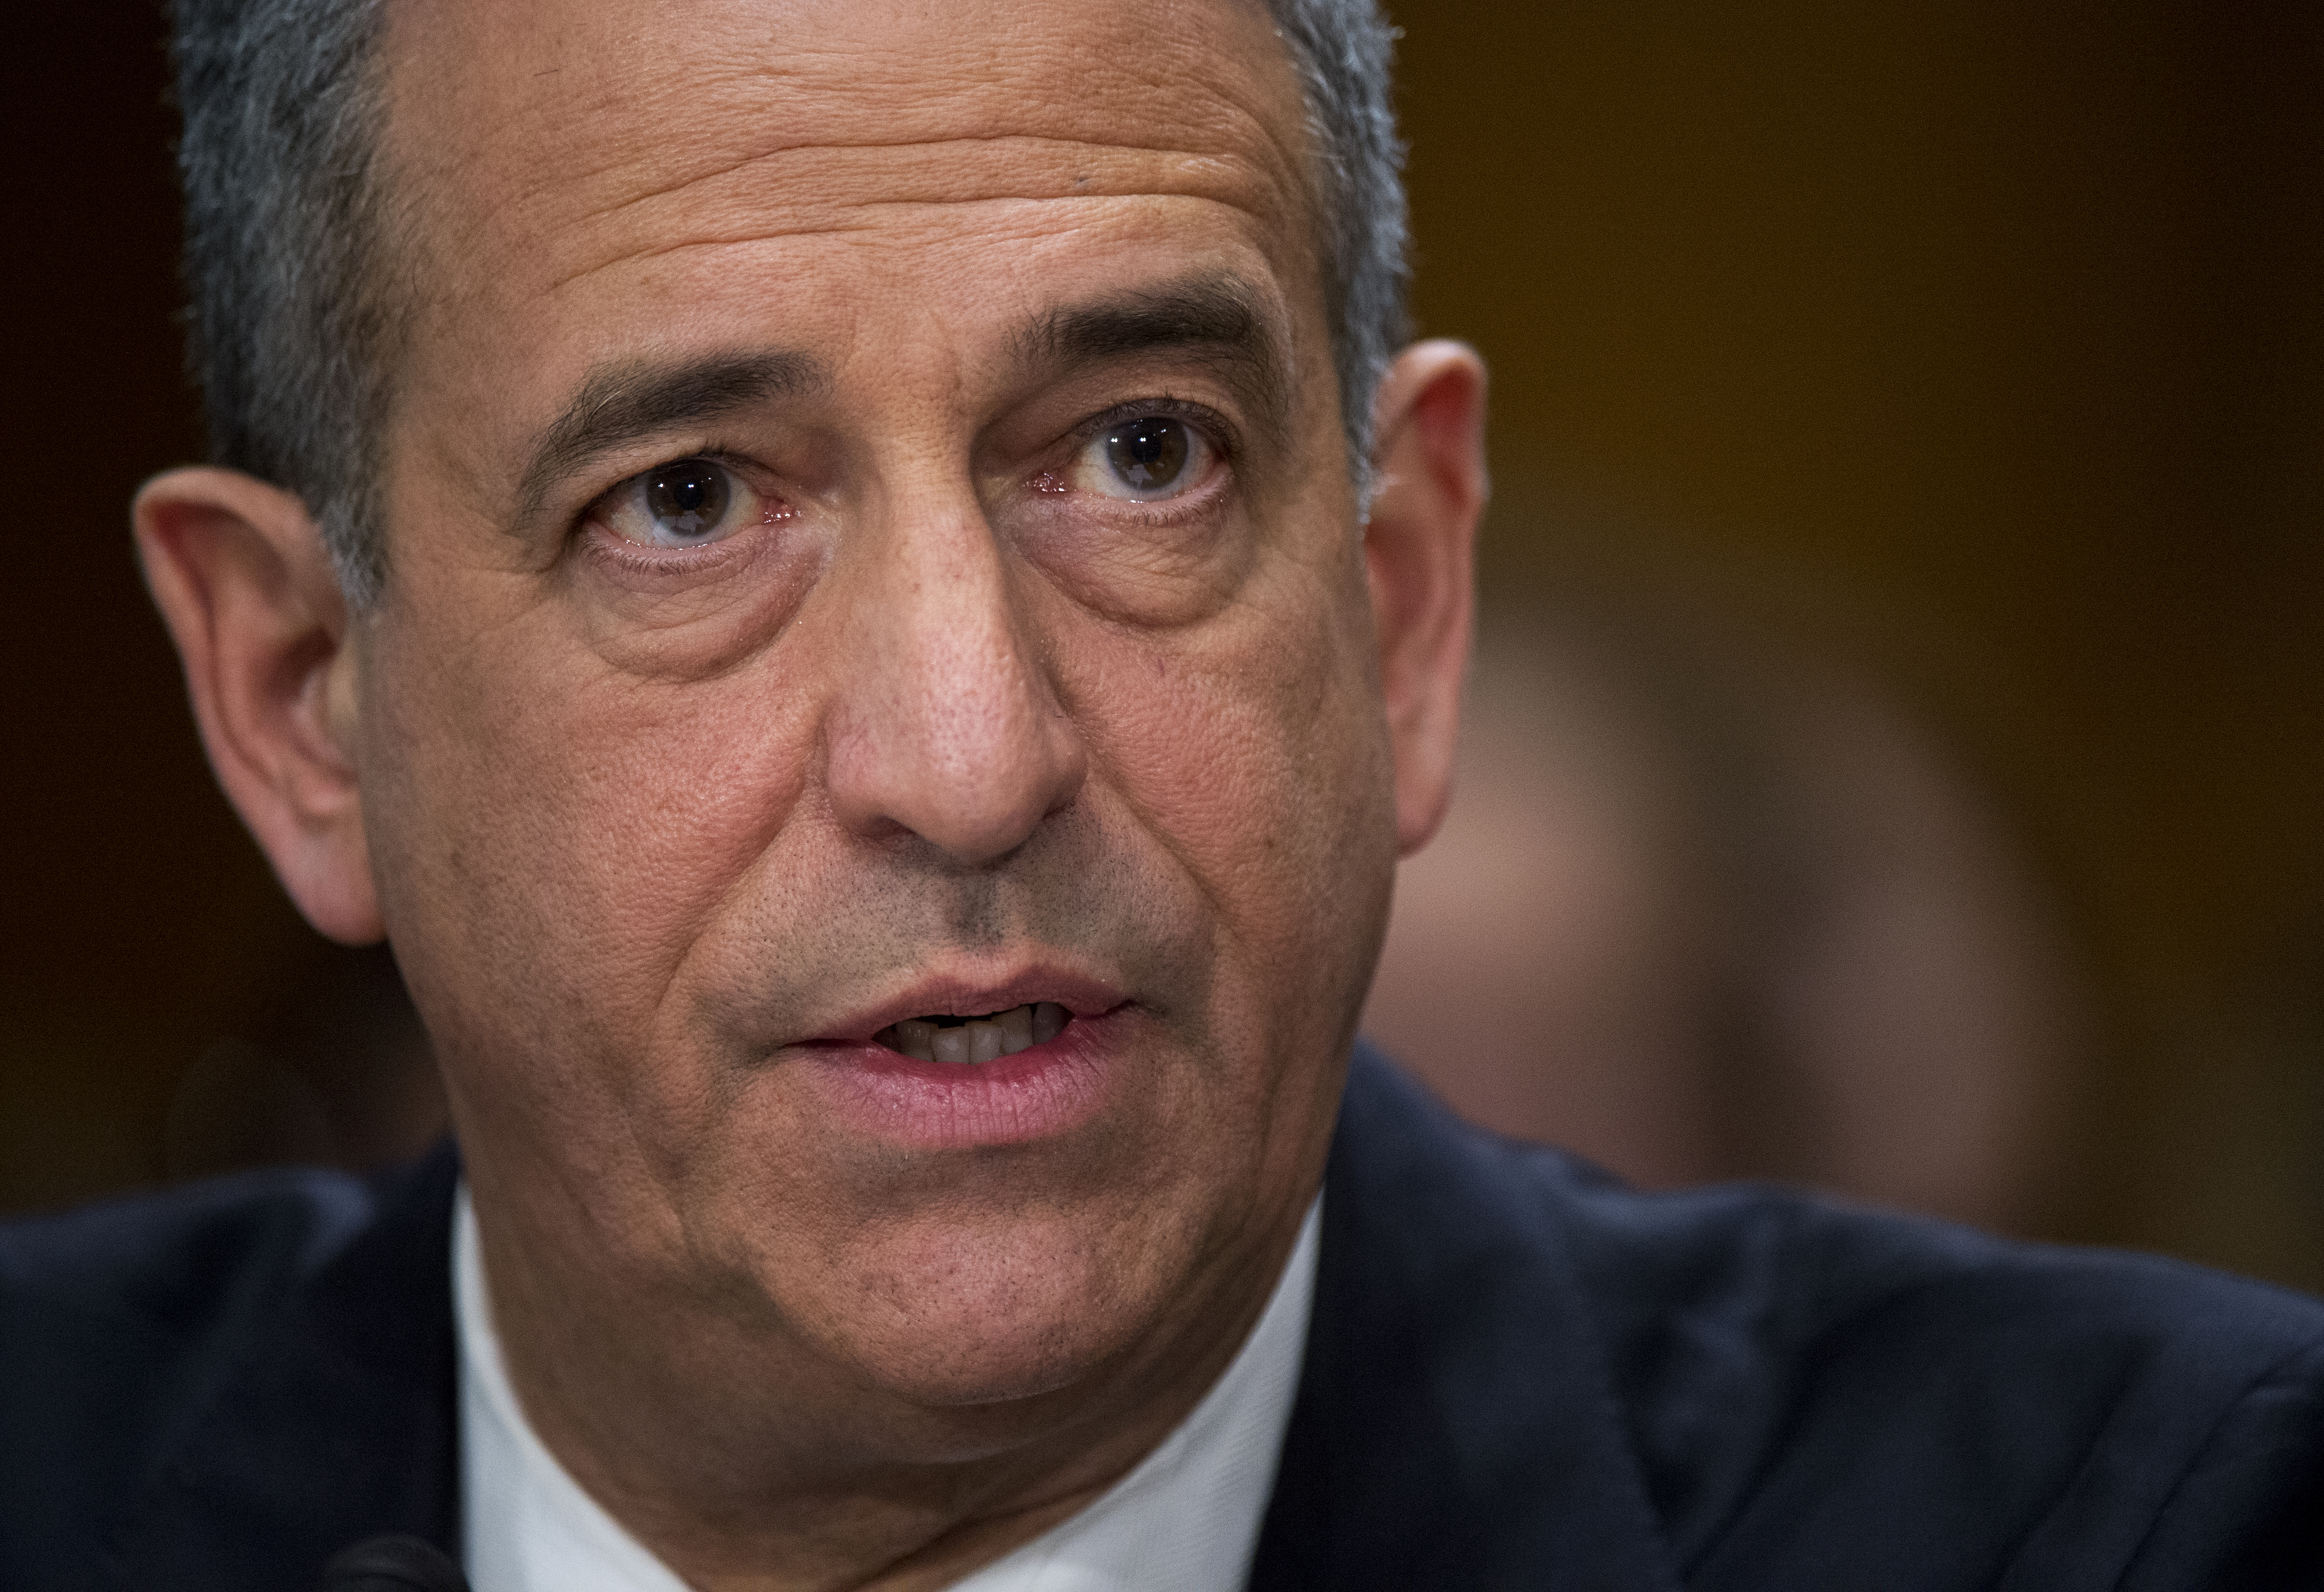 Russ Feingold testifies before a Senate Foreign Relations Committee hearing, on Feb. 26, 2016. (Tom Williams—Getty Images)